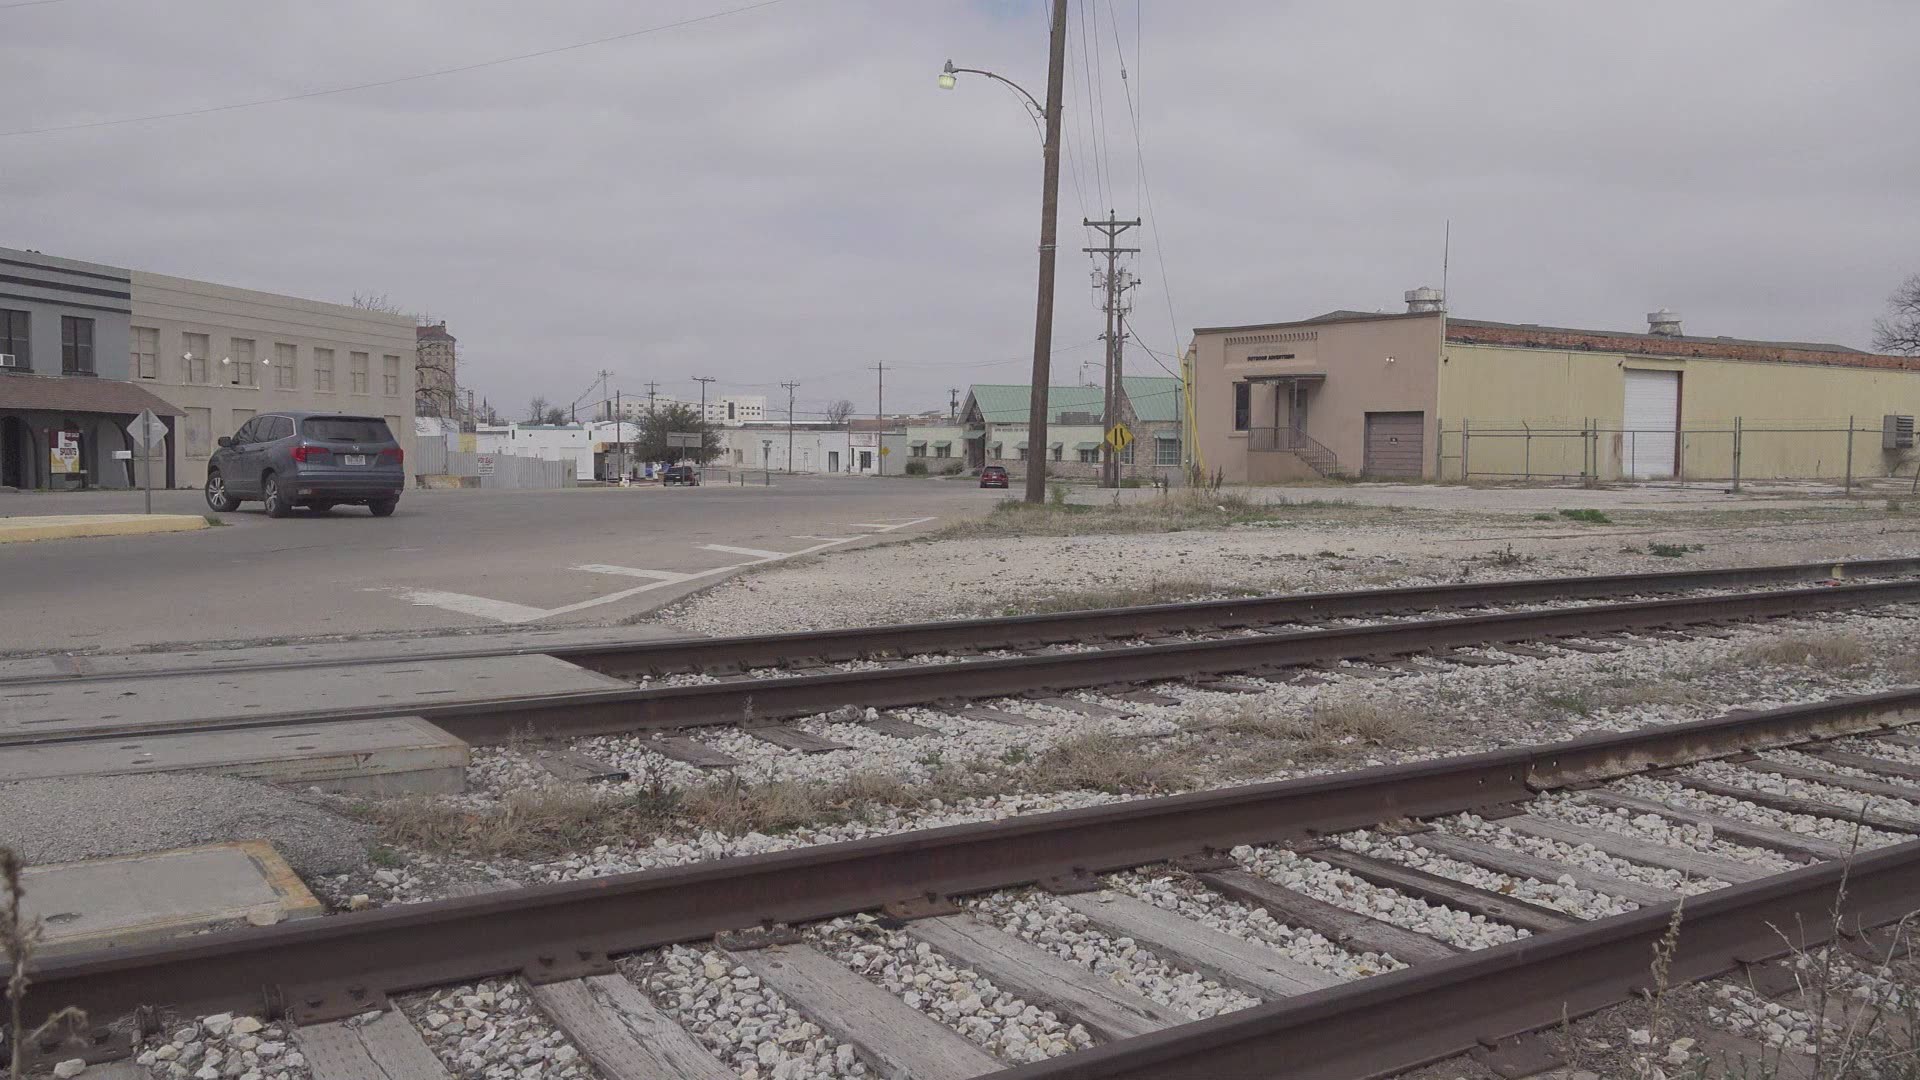 Faster trains will be coming through the San Angelo junction after $150 million was reinvested in the line. The upgrade to the rails allowed trains to nearly double their speed. However, the higher speed rate will only cover a 70-mile section of the more than 300-mile South Orient Rail line.